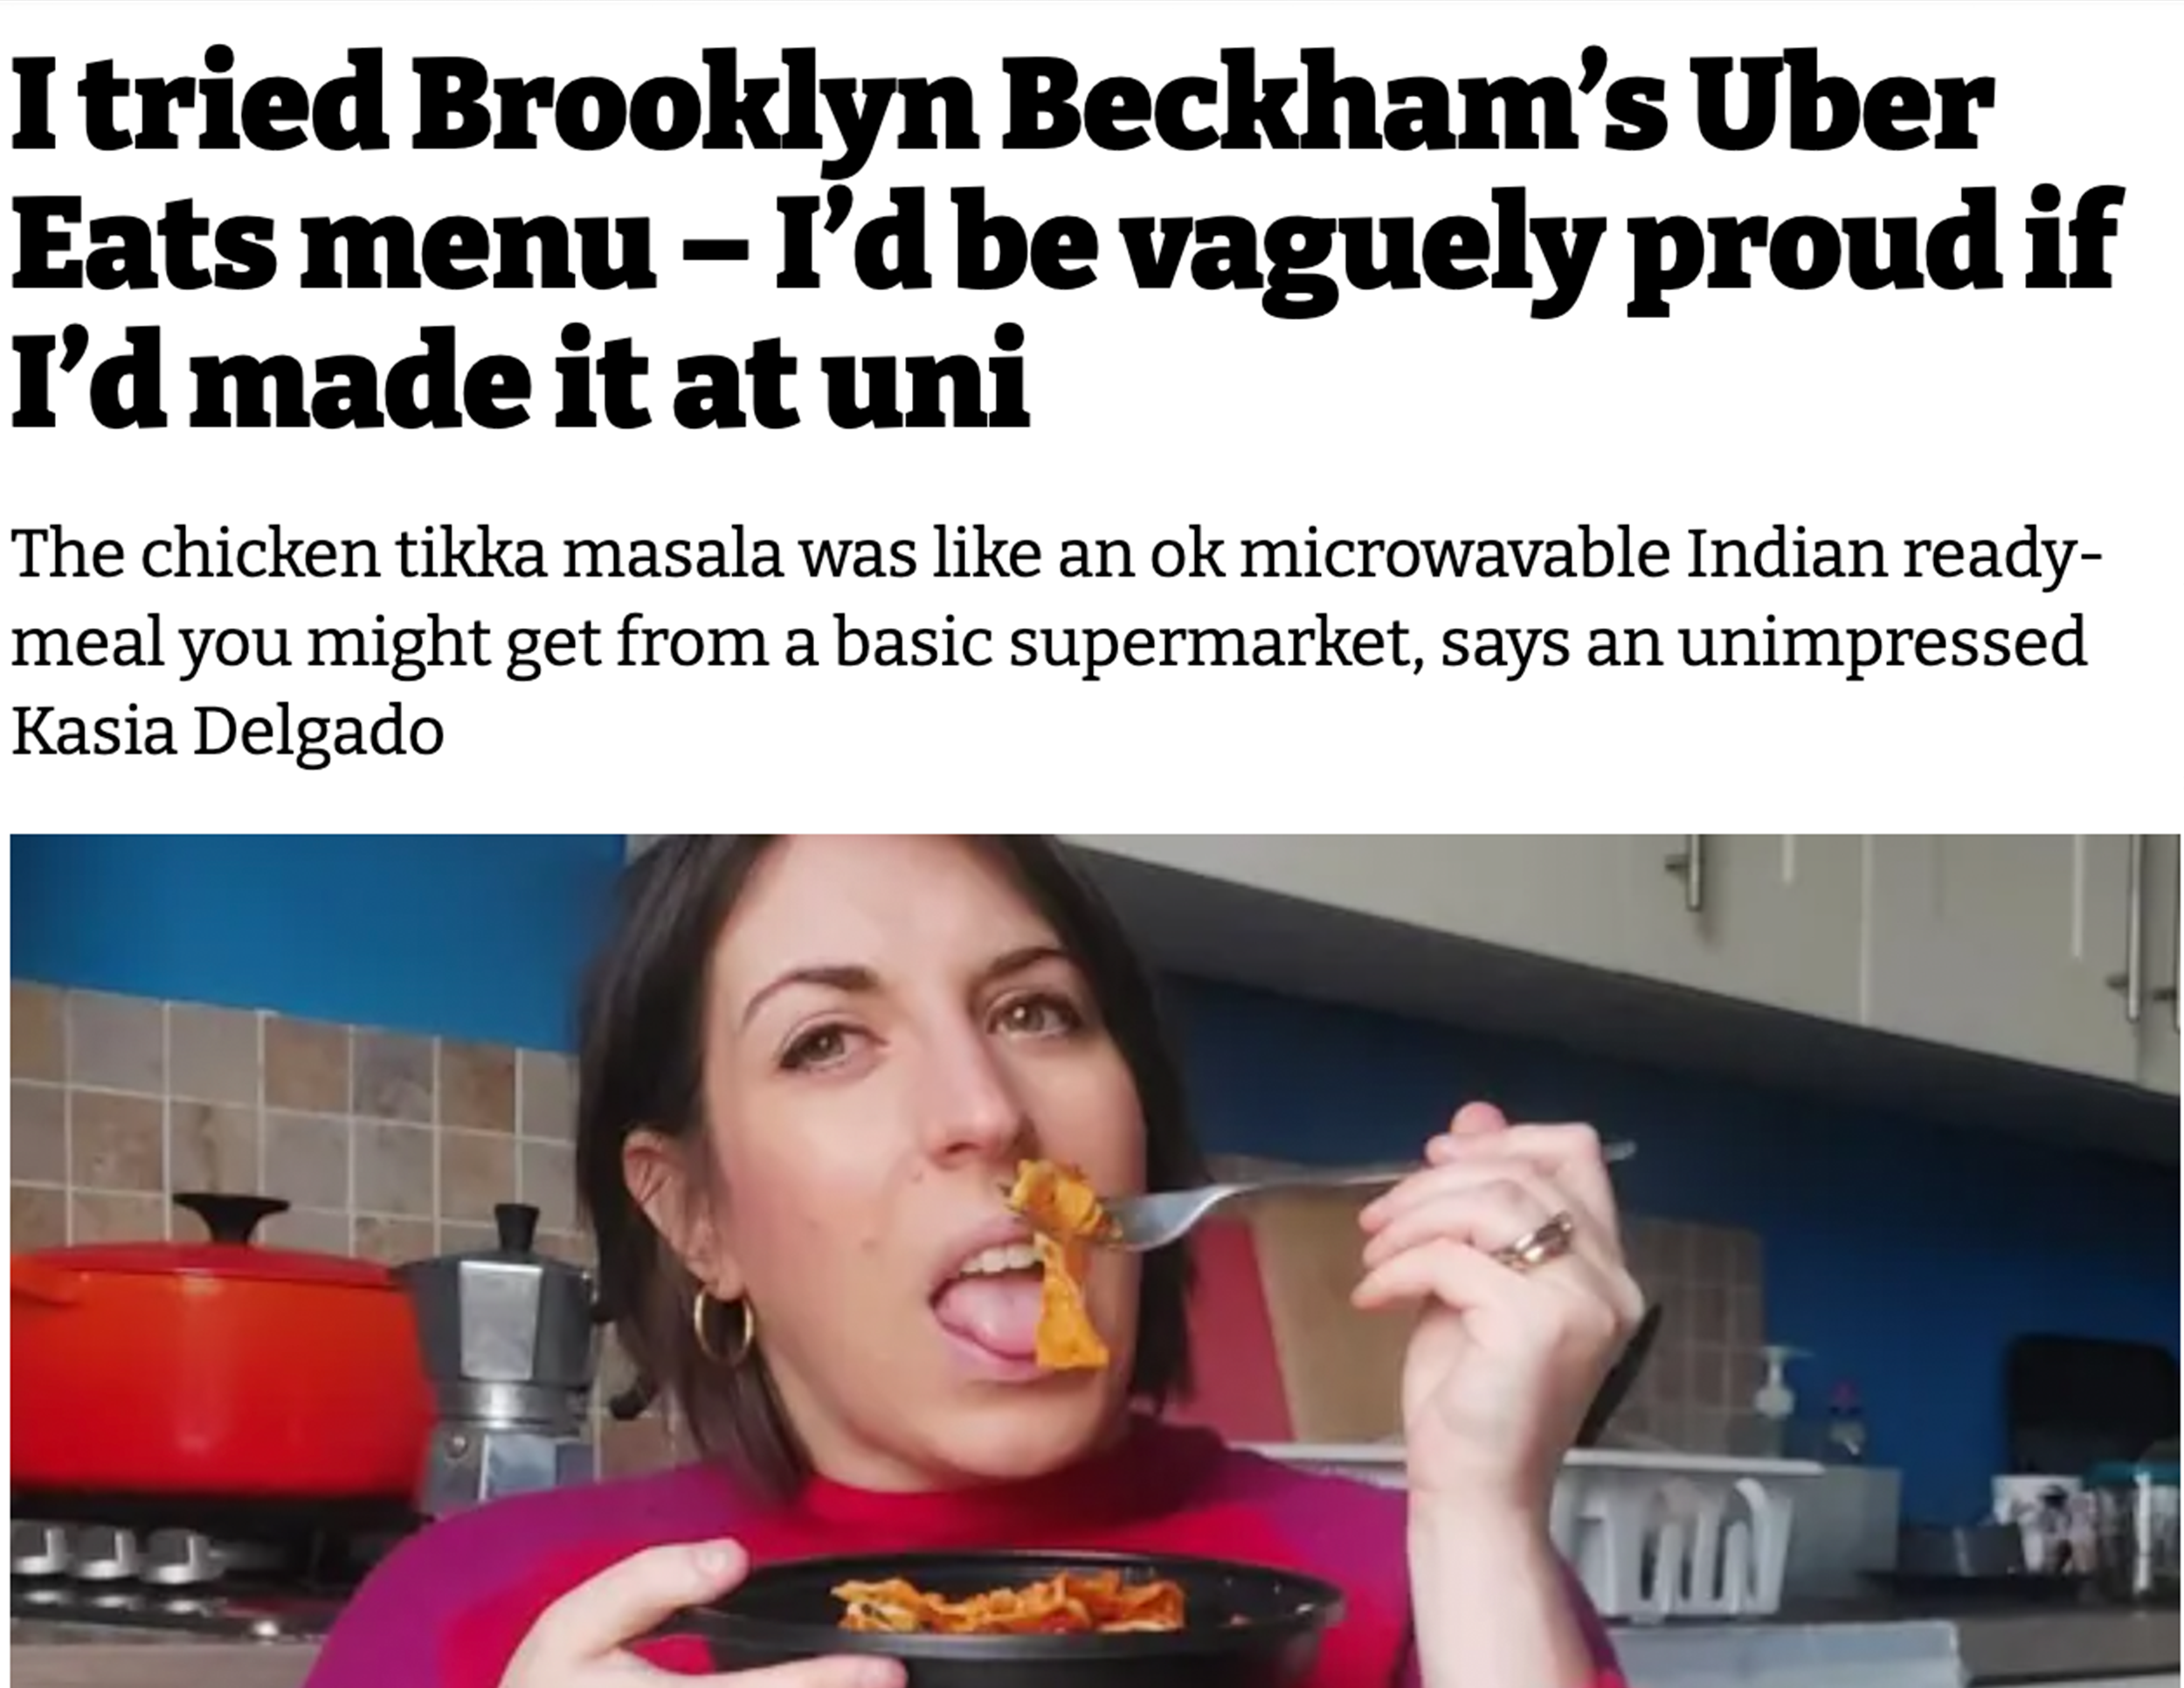 A screenshot of the headline and photo used in the Brooklyn Beckham food review on iNews online.